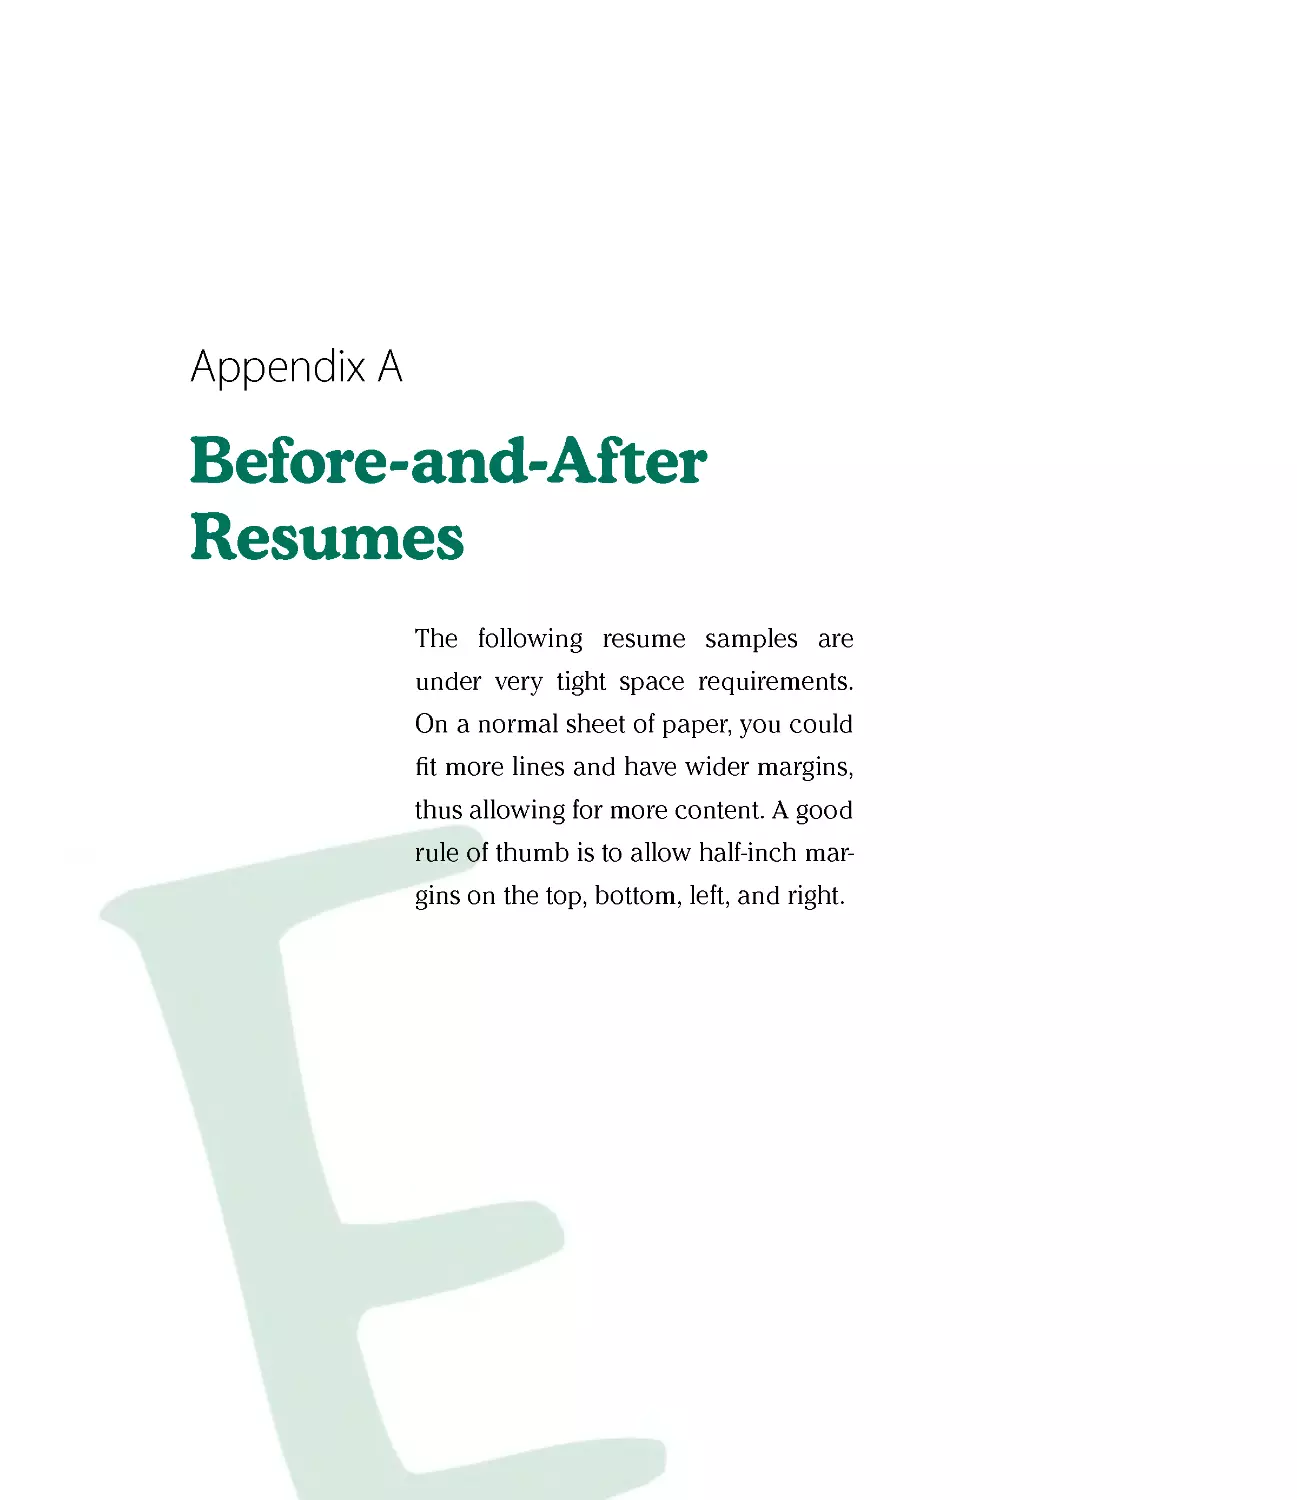 Appendix A: Before-and-After Resumes